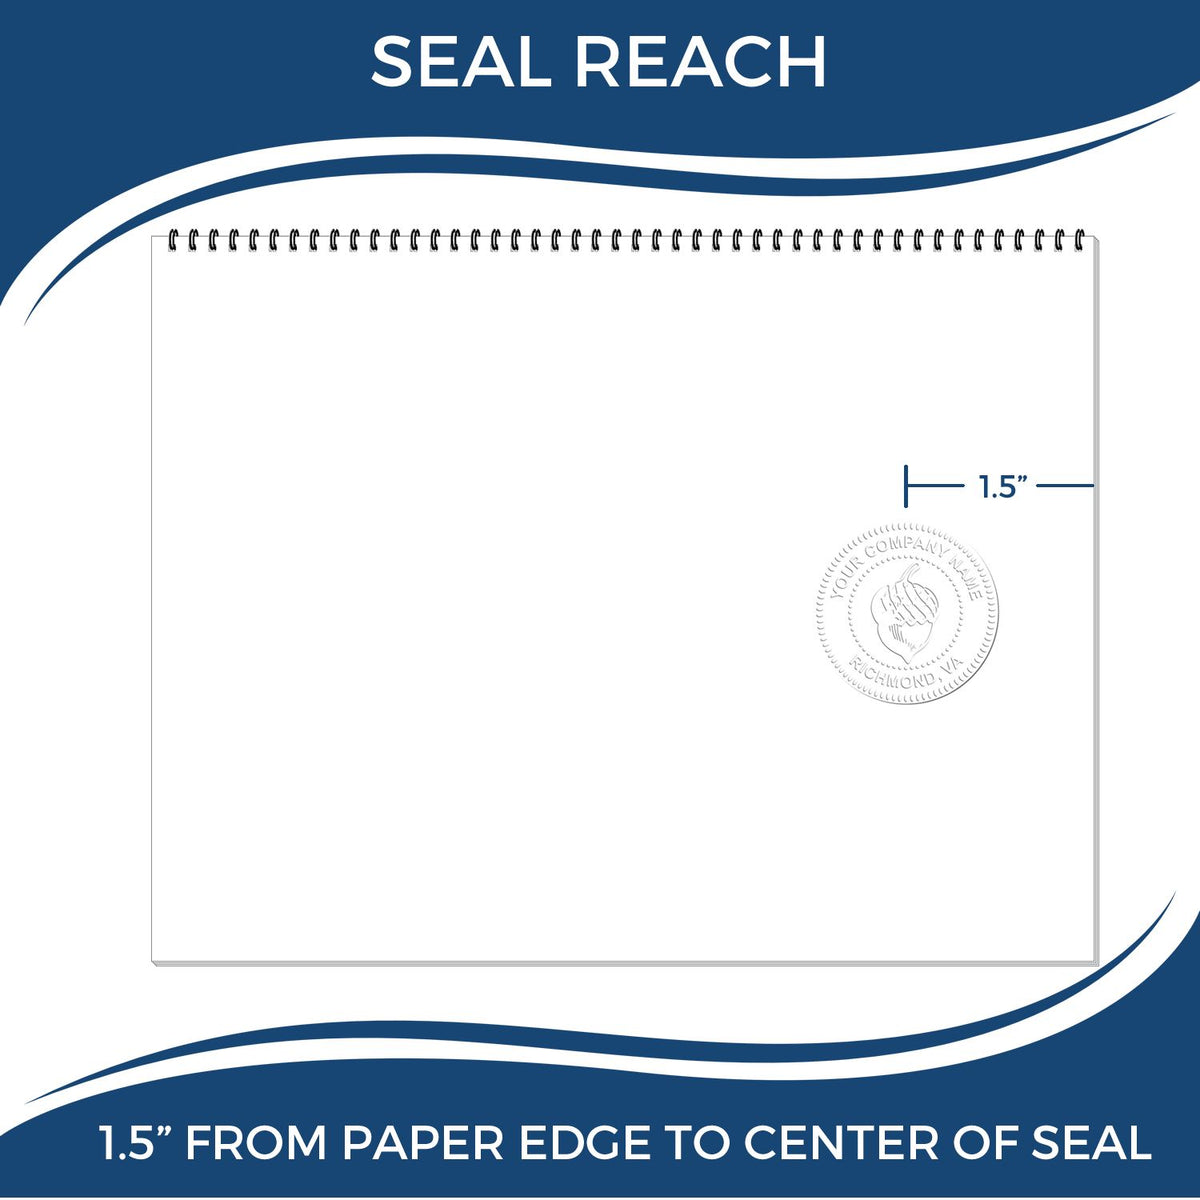 An infographic showing the seal reach which is represented by a ruler and a miniature seal image of the Gift Pennsylvania Landscape Architect Seal